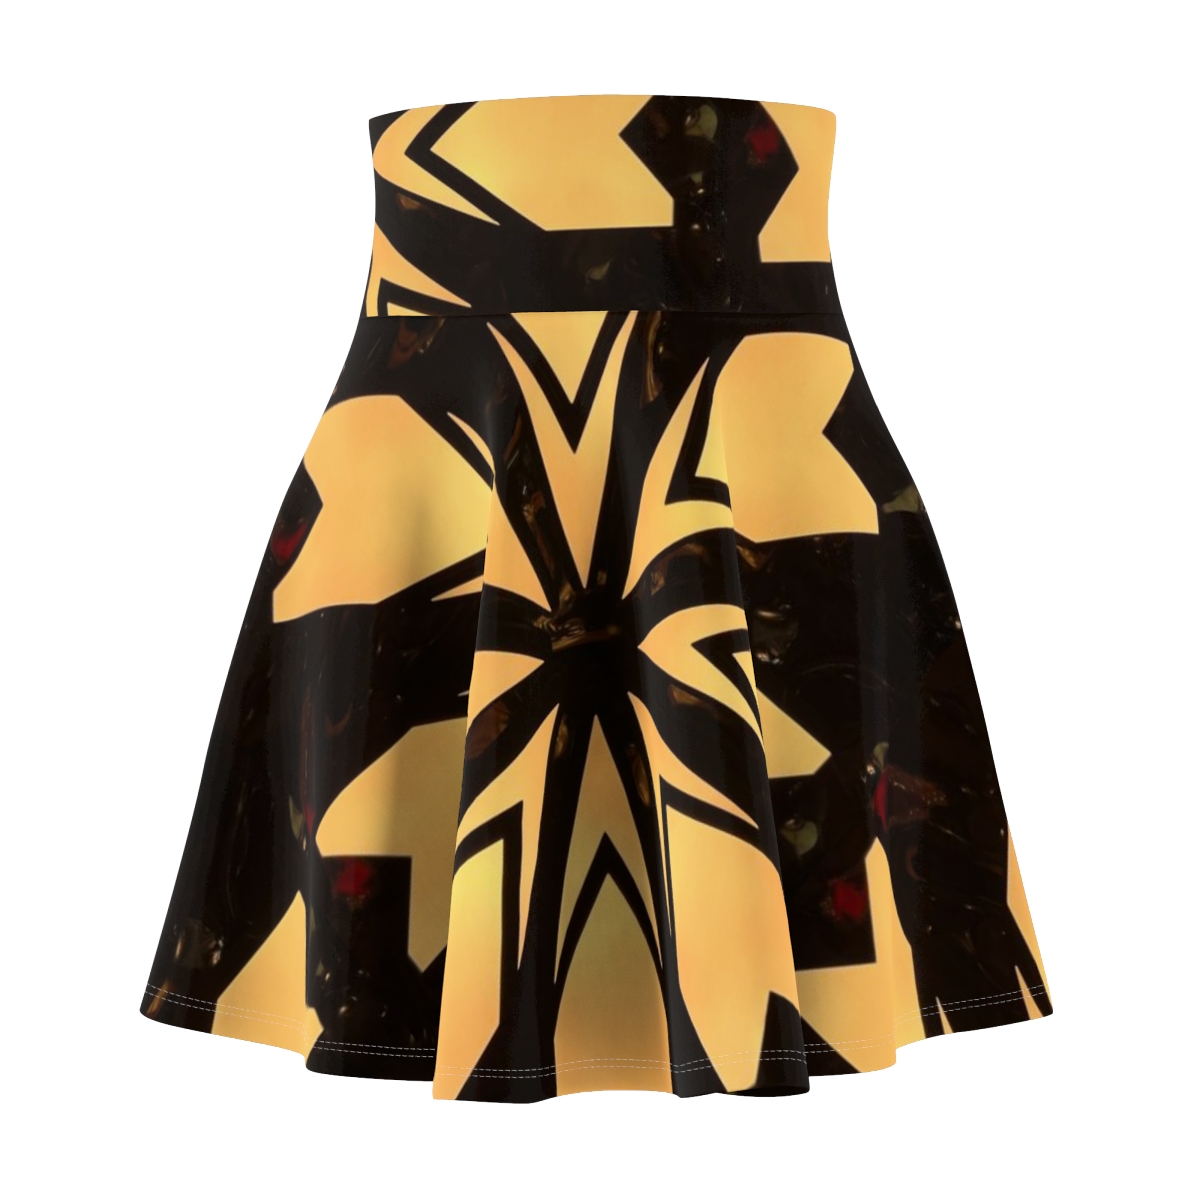 Flowing, washed matte fabric skirt | EMPORIO ARMANI Woman